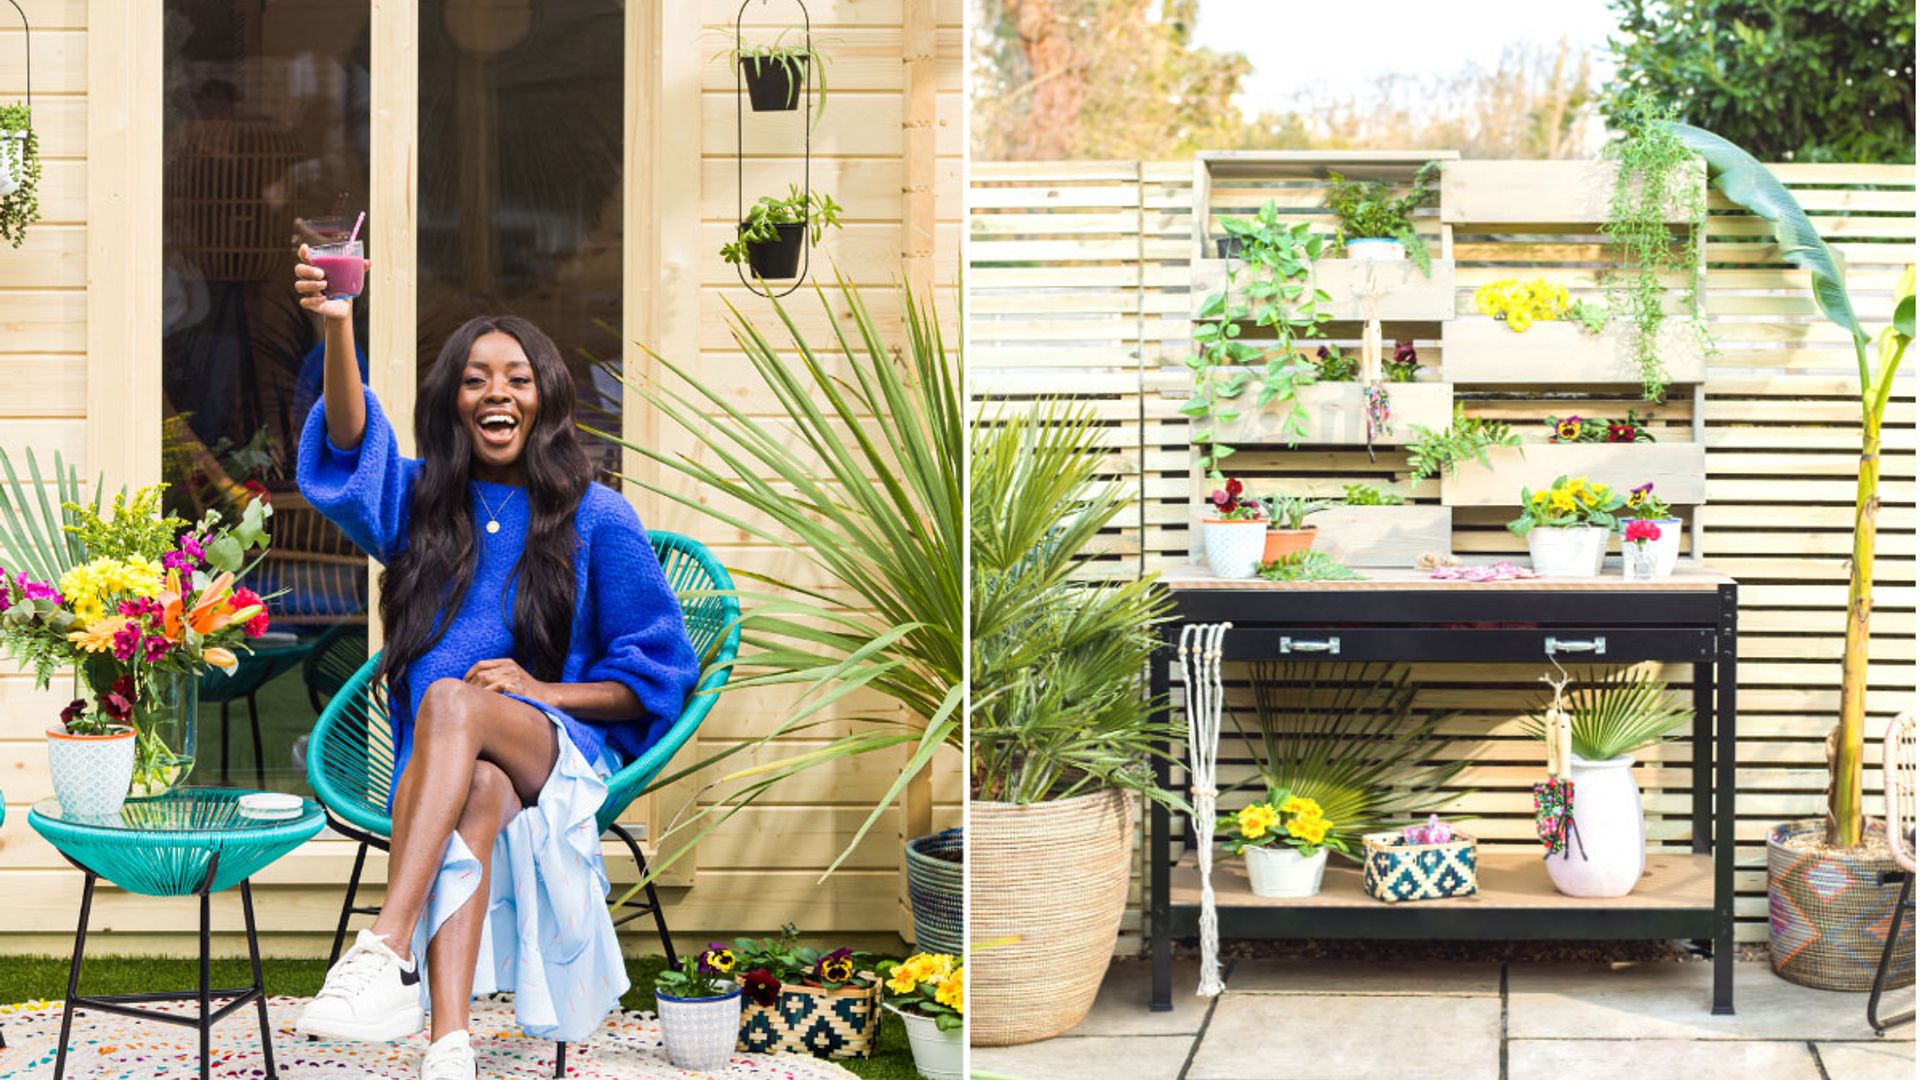 AJ Odudu's magical garden is a city sanctuary – exclusive interview and photos